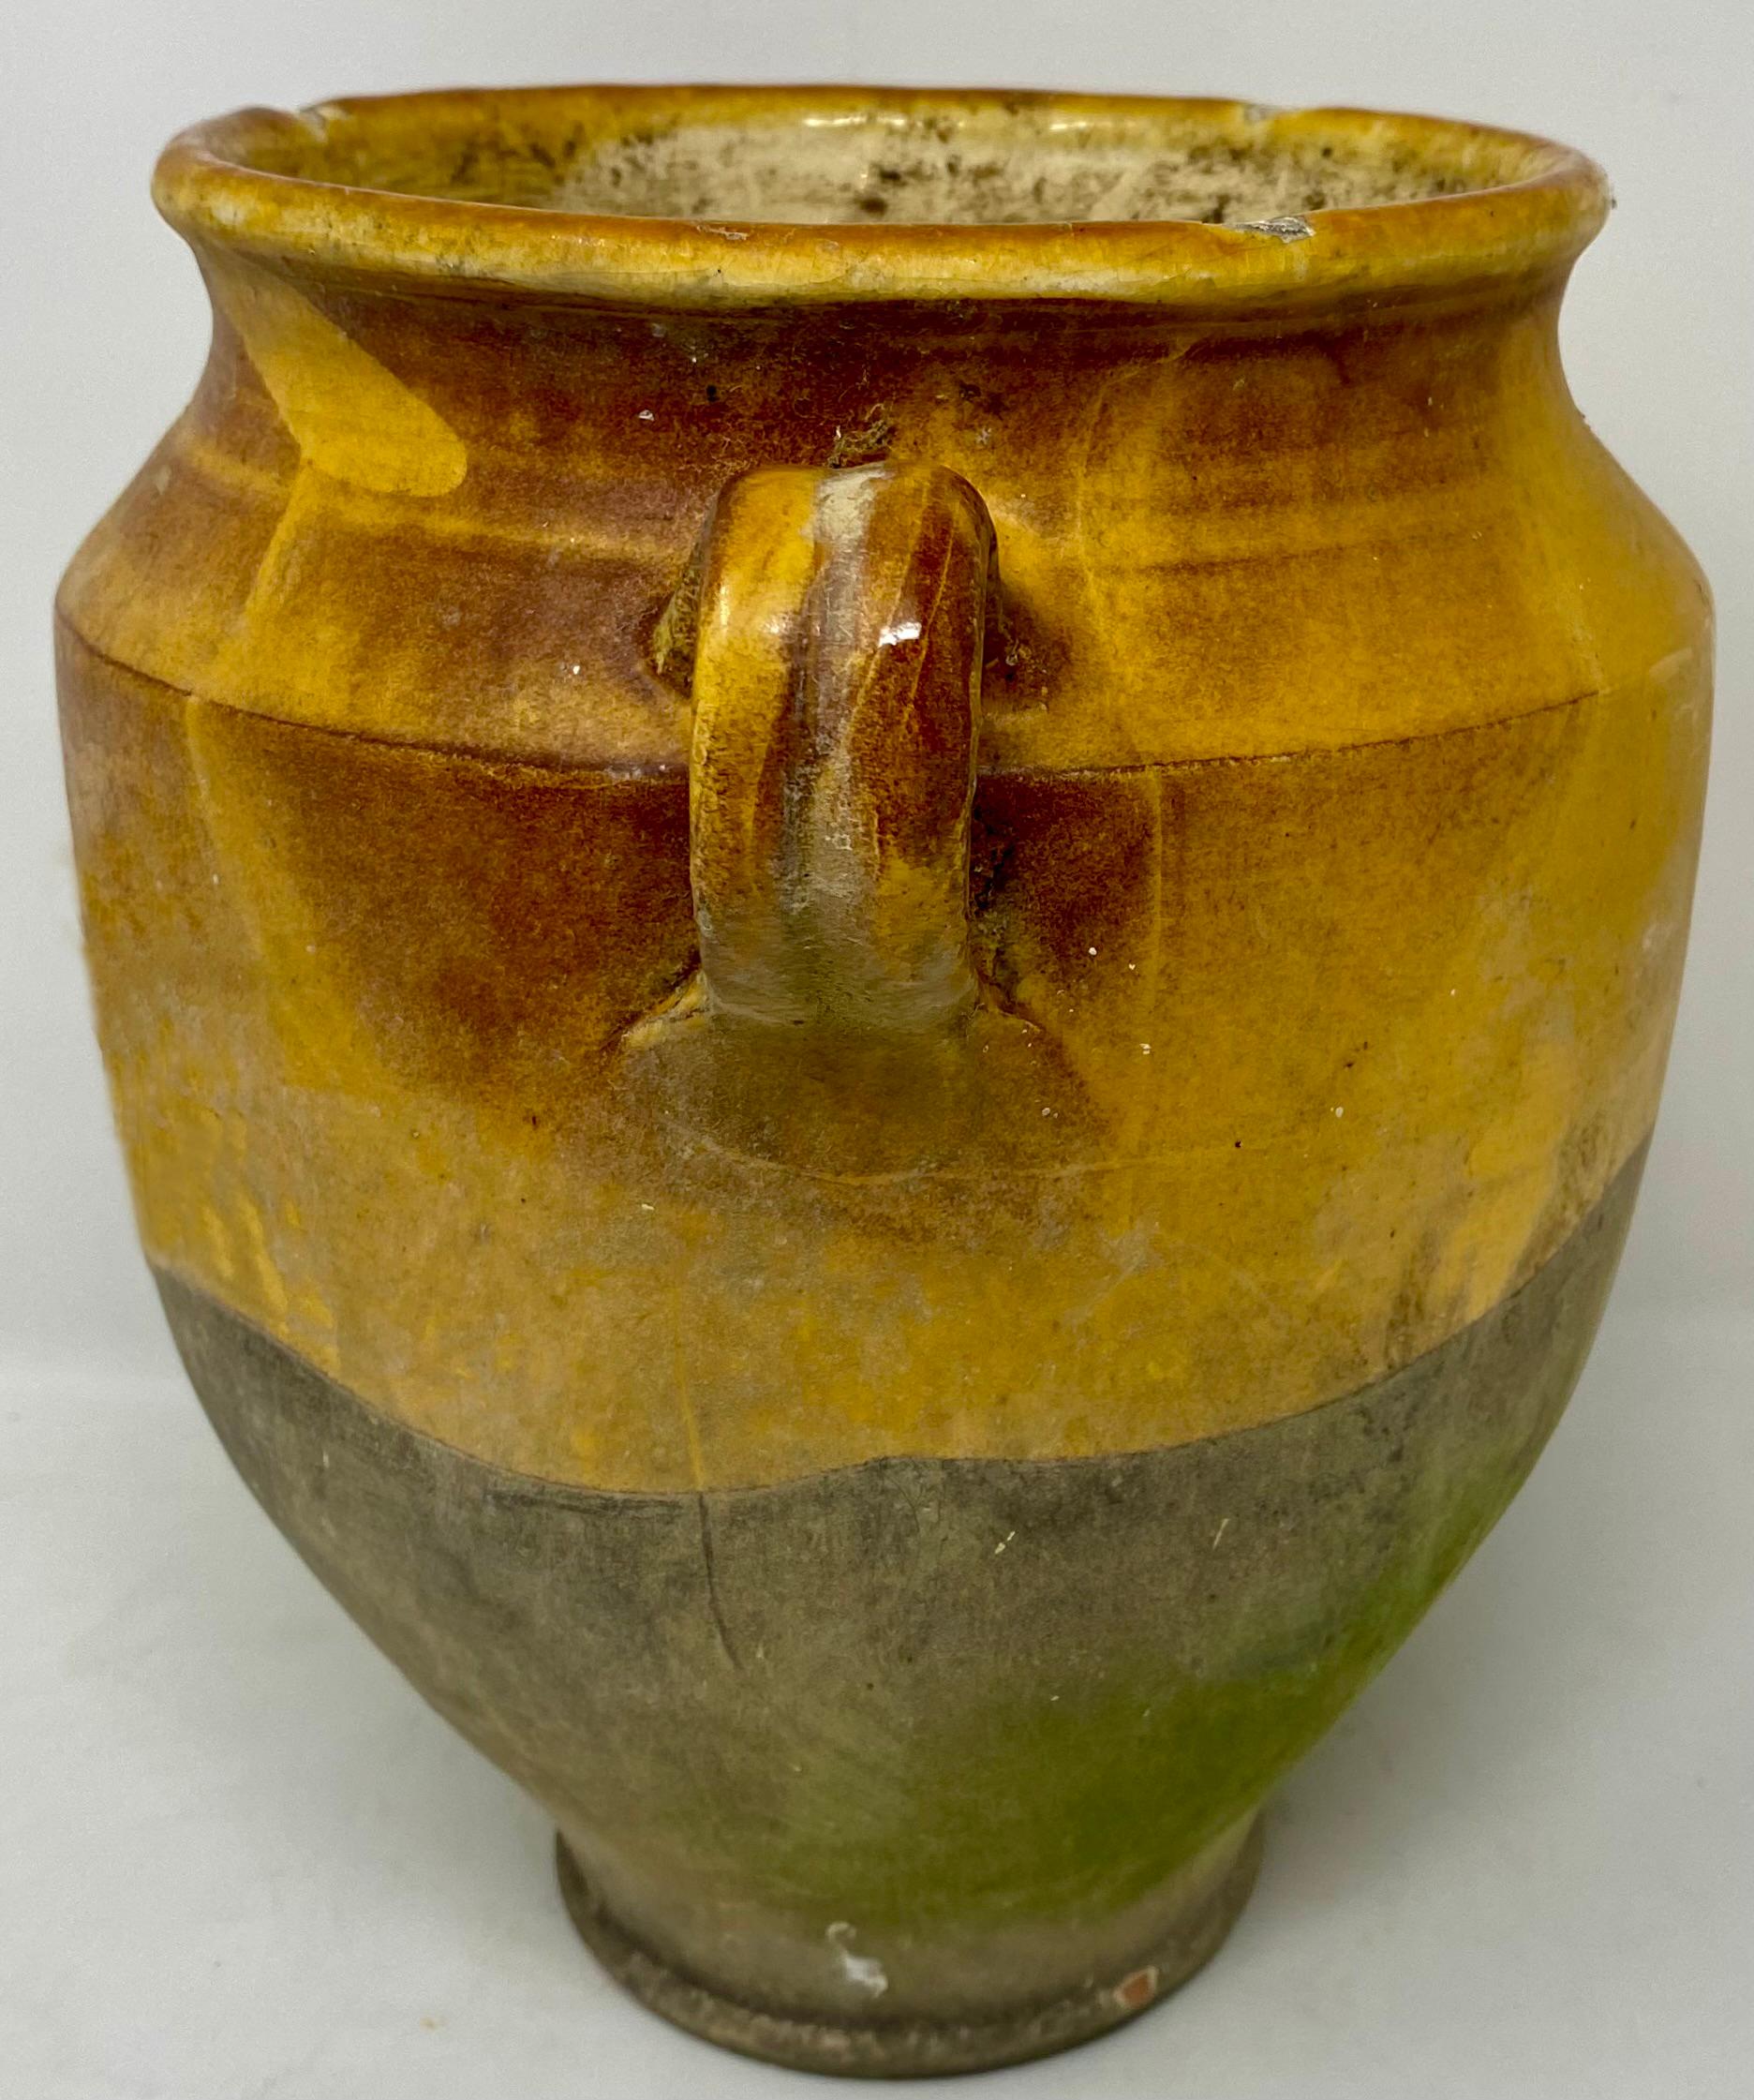 Vintage French Provincial Yellow Terracotta Glazed Confit Pottery Jar w/ Handles In Good Condition For Sale In New Orleans, LA